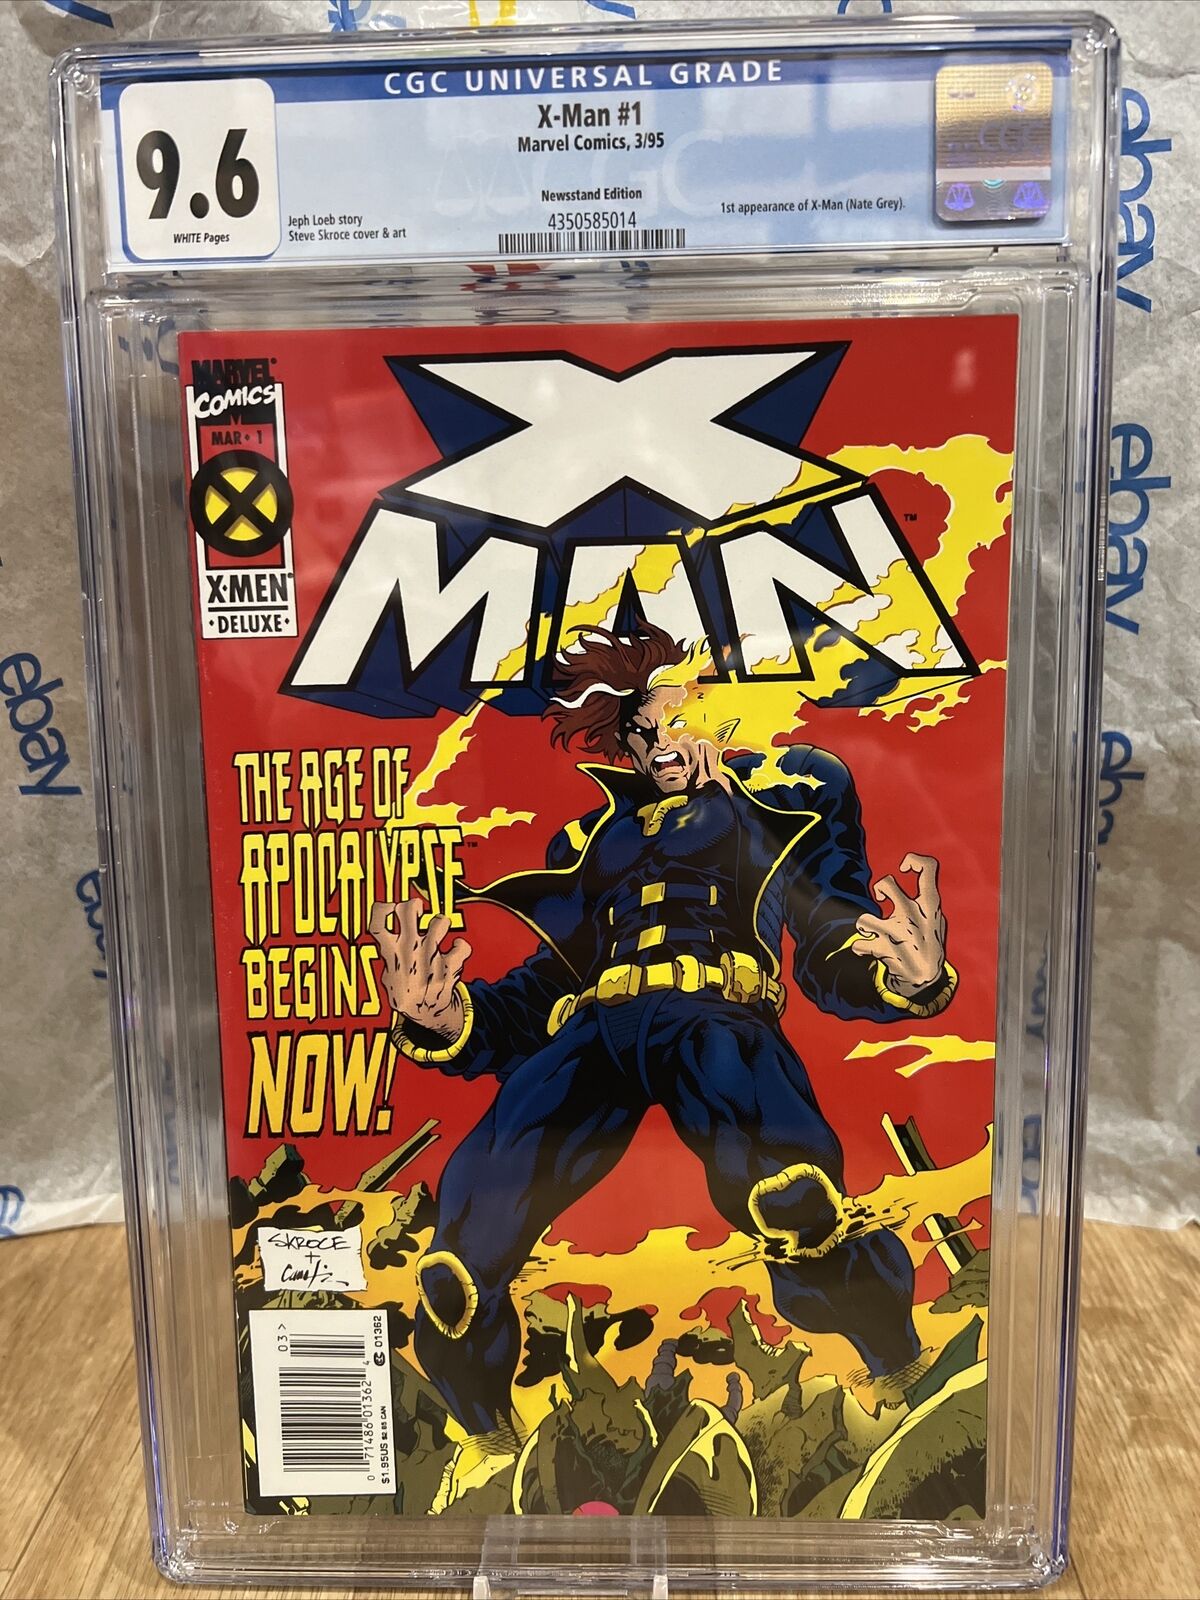 X-Man #1 1995 Marvel Comics CGC 9.6 White Pages Newsstand Edition Rare